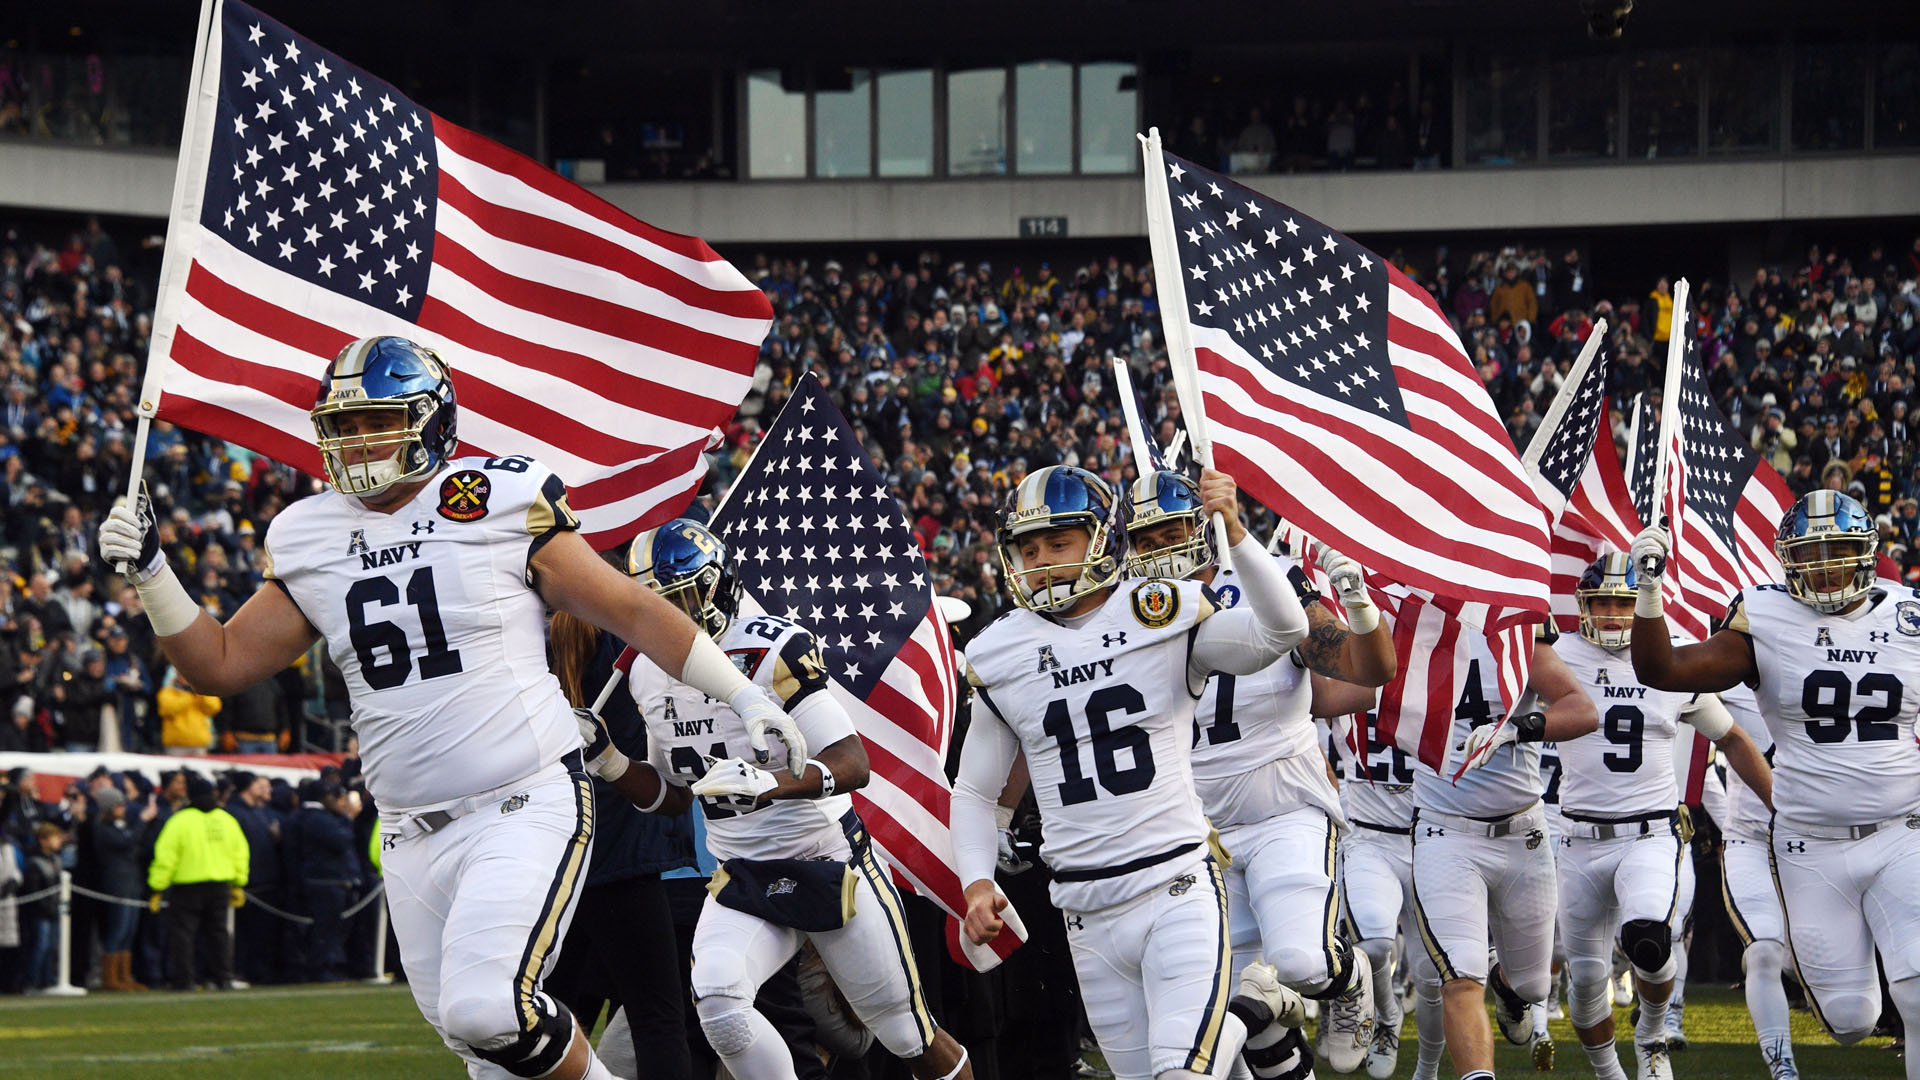 Navy's defense extends past the football field for Saturday's matchup